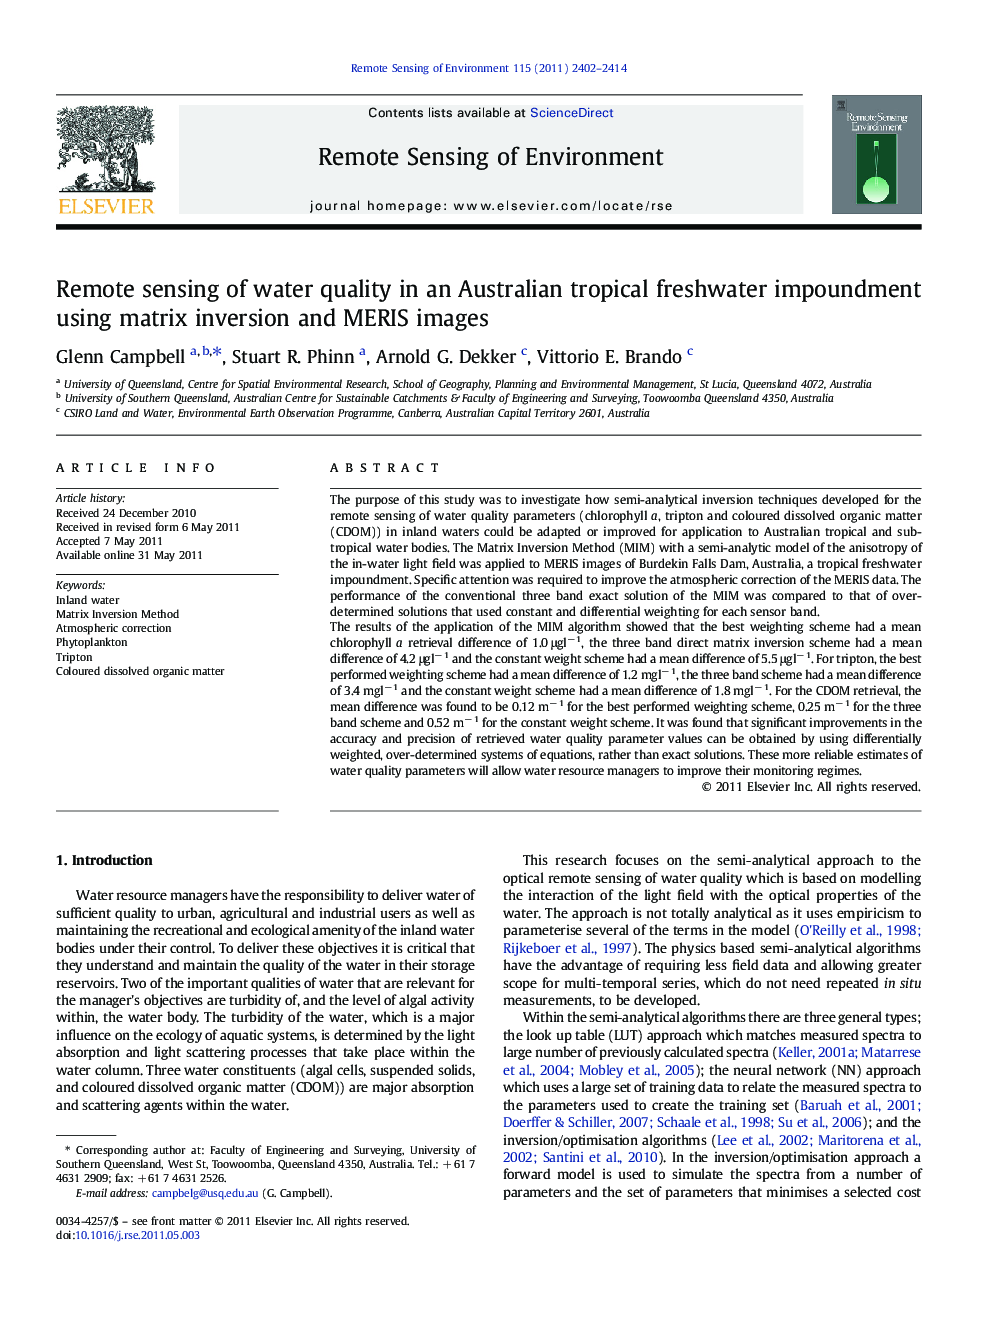 Remote sensing of water quality in an Australian tropical freshwater impoundment using matrix inversion and MERIS images